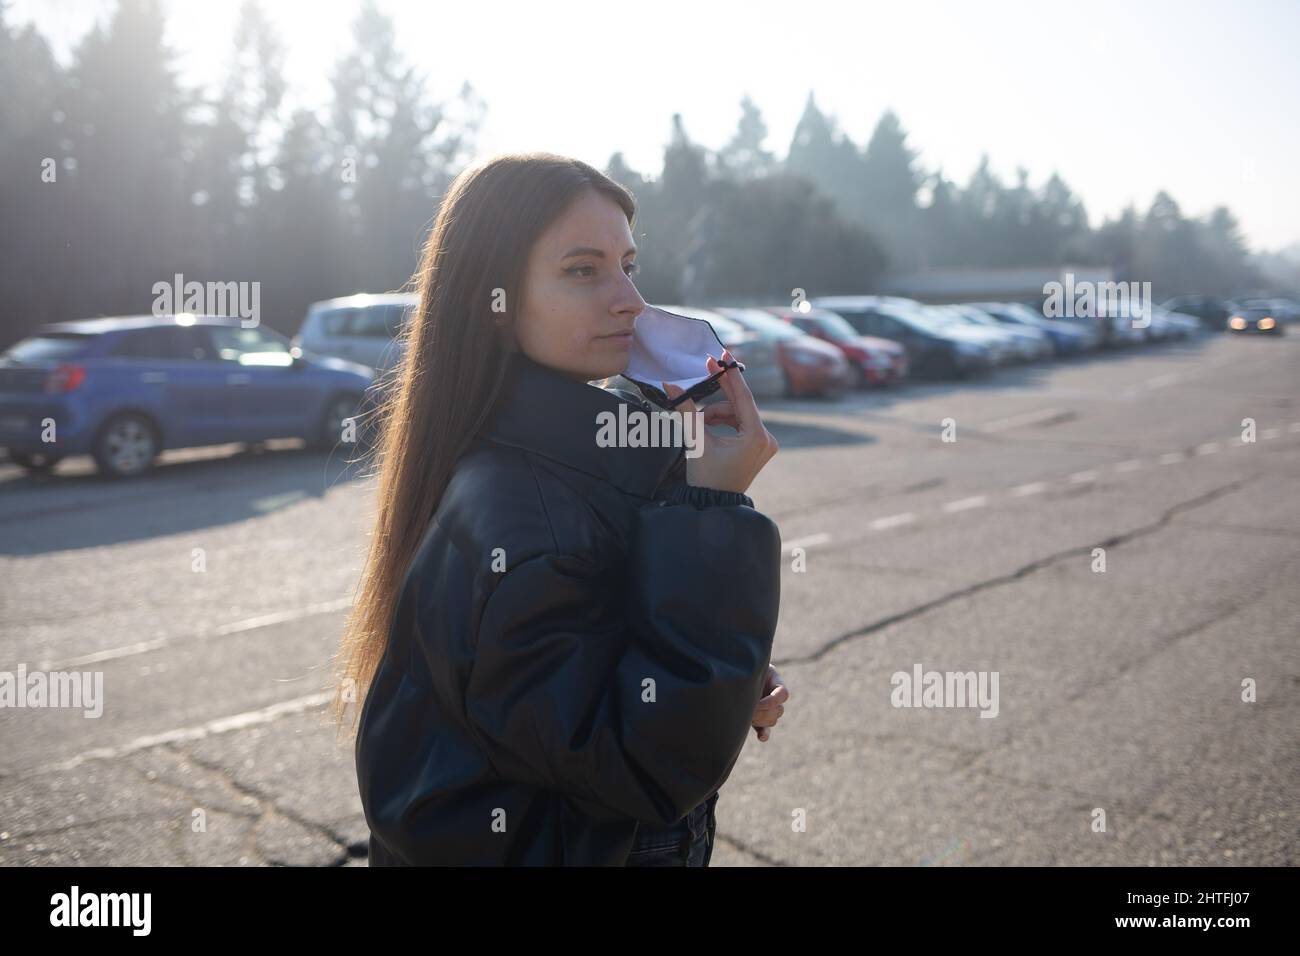 Woman wearing a mask, black jacket and jeans walking in a parking area Stock Photo